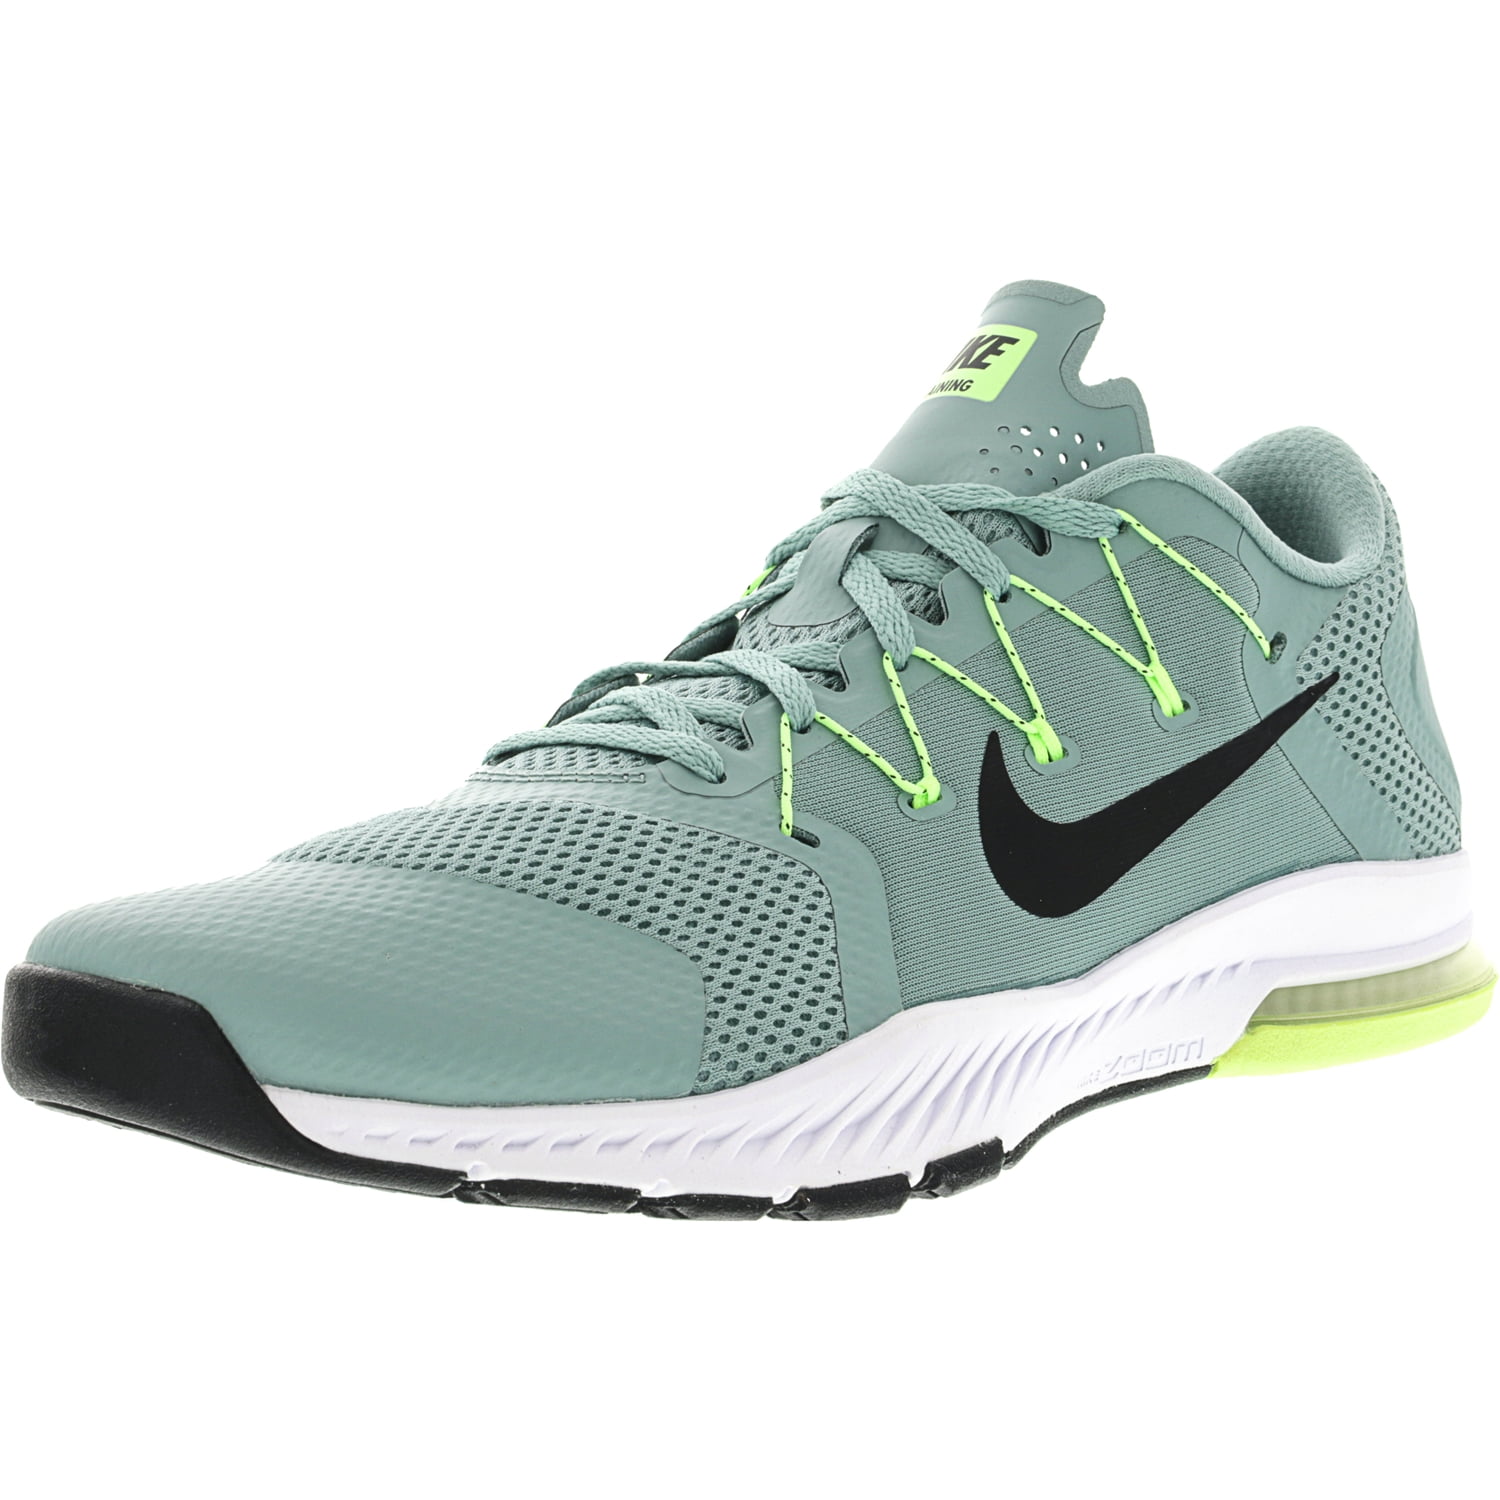 Nike Zoom Complete / Black-Ghost Green-White Ankle-High Training - 10.5M - Walmart.com